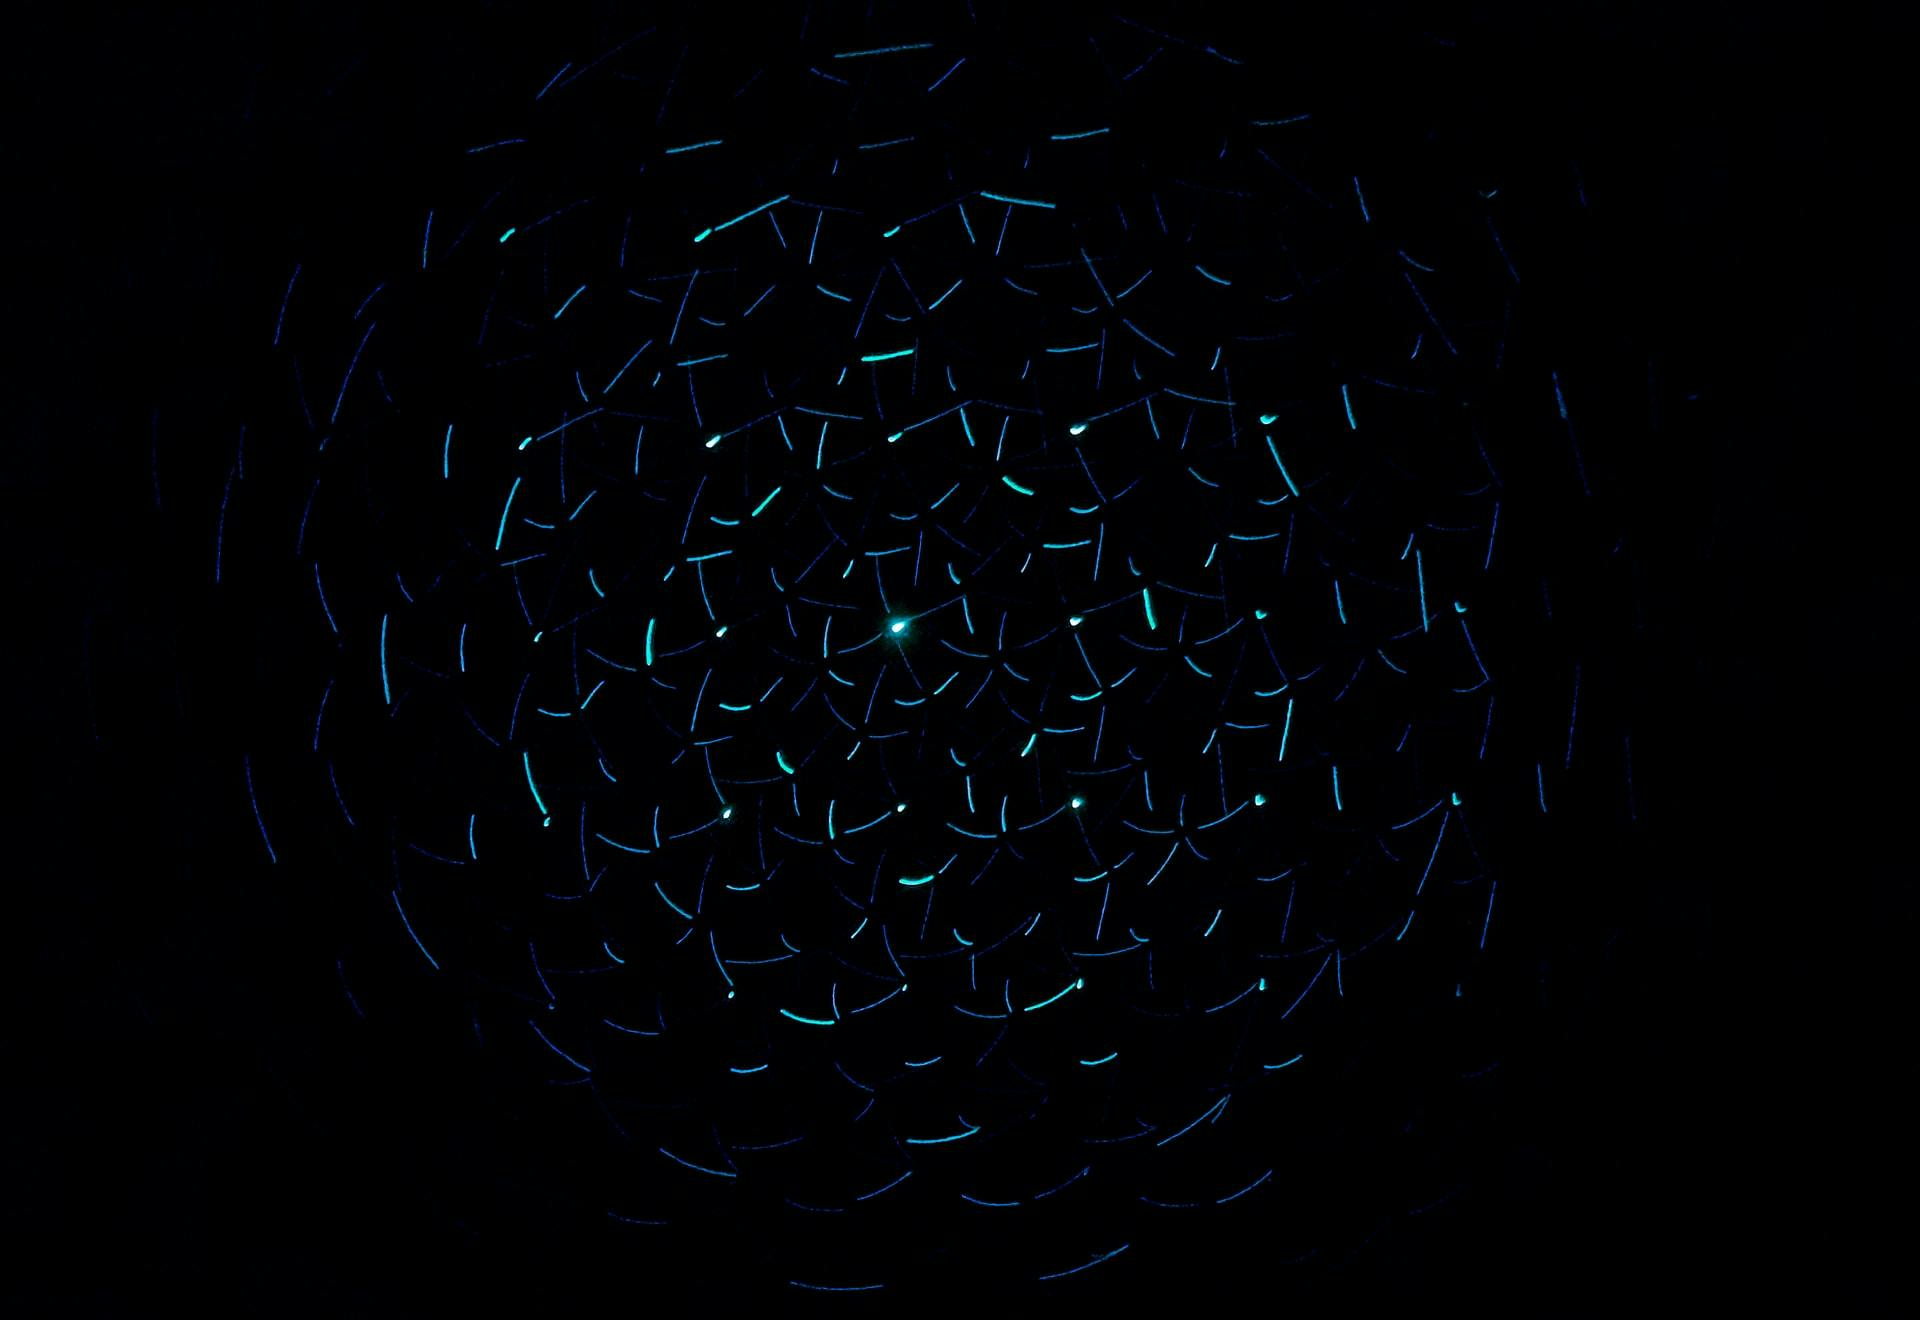 Against a black background, a point of light shines from the center of a sphere whose surface is formed by a repeating series of polygonal shapes